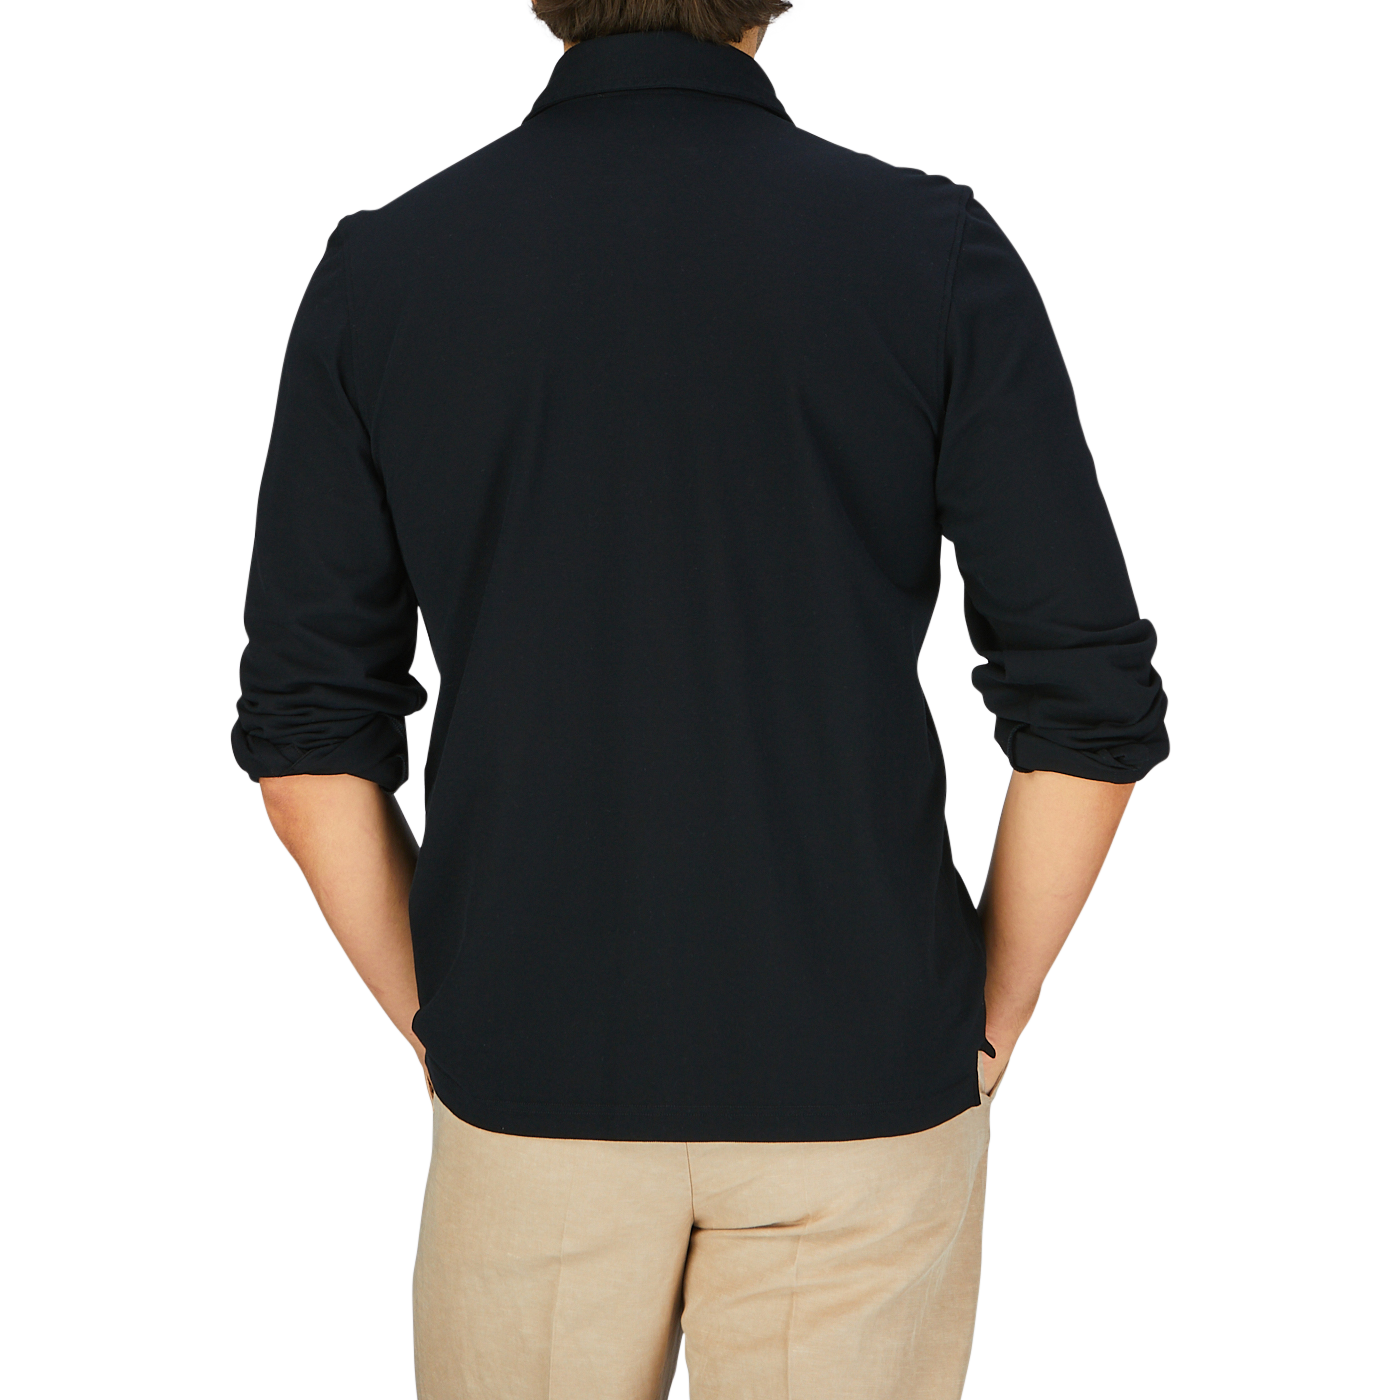 Rear view of a person wearing a black long-sleeve Gran Sasso Black Cotton Jersey Popover Shirt and beige pants.